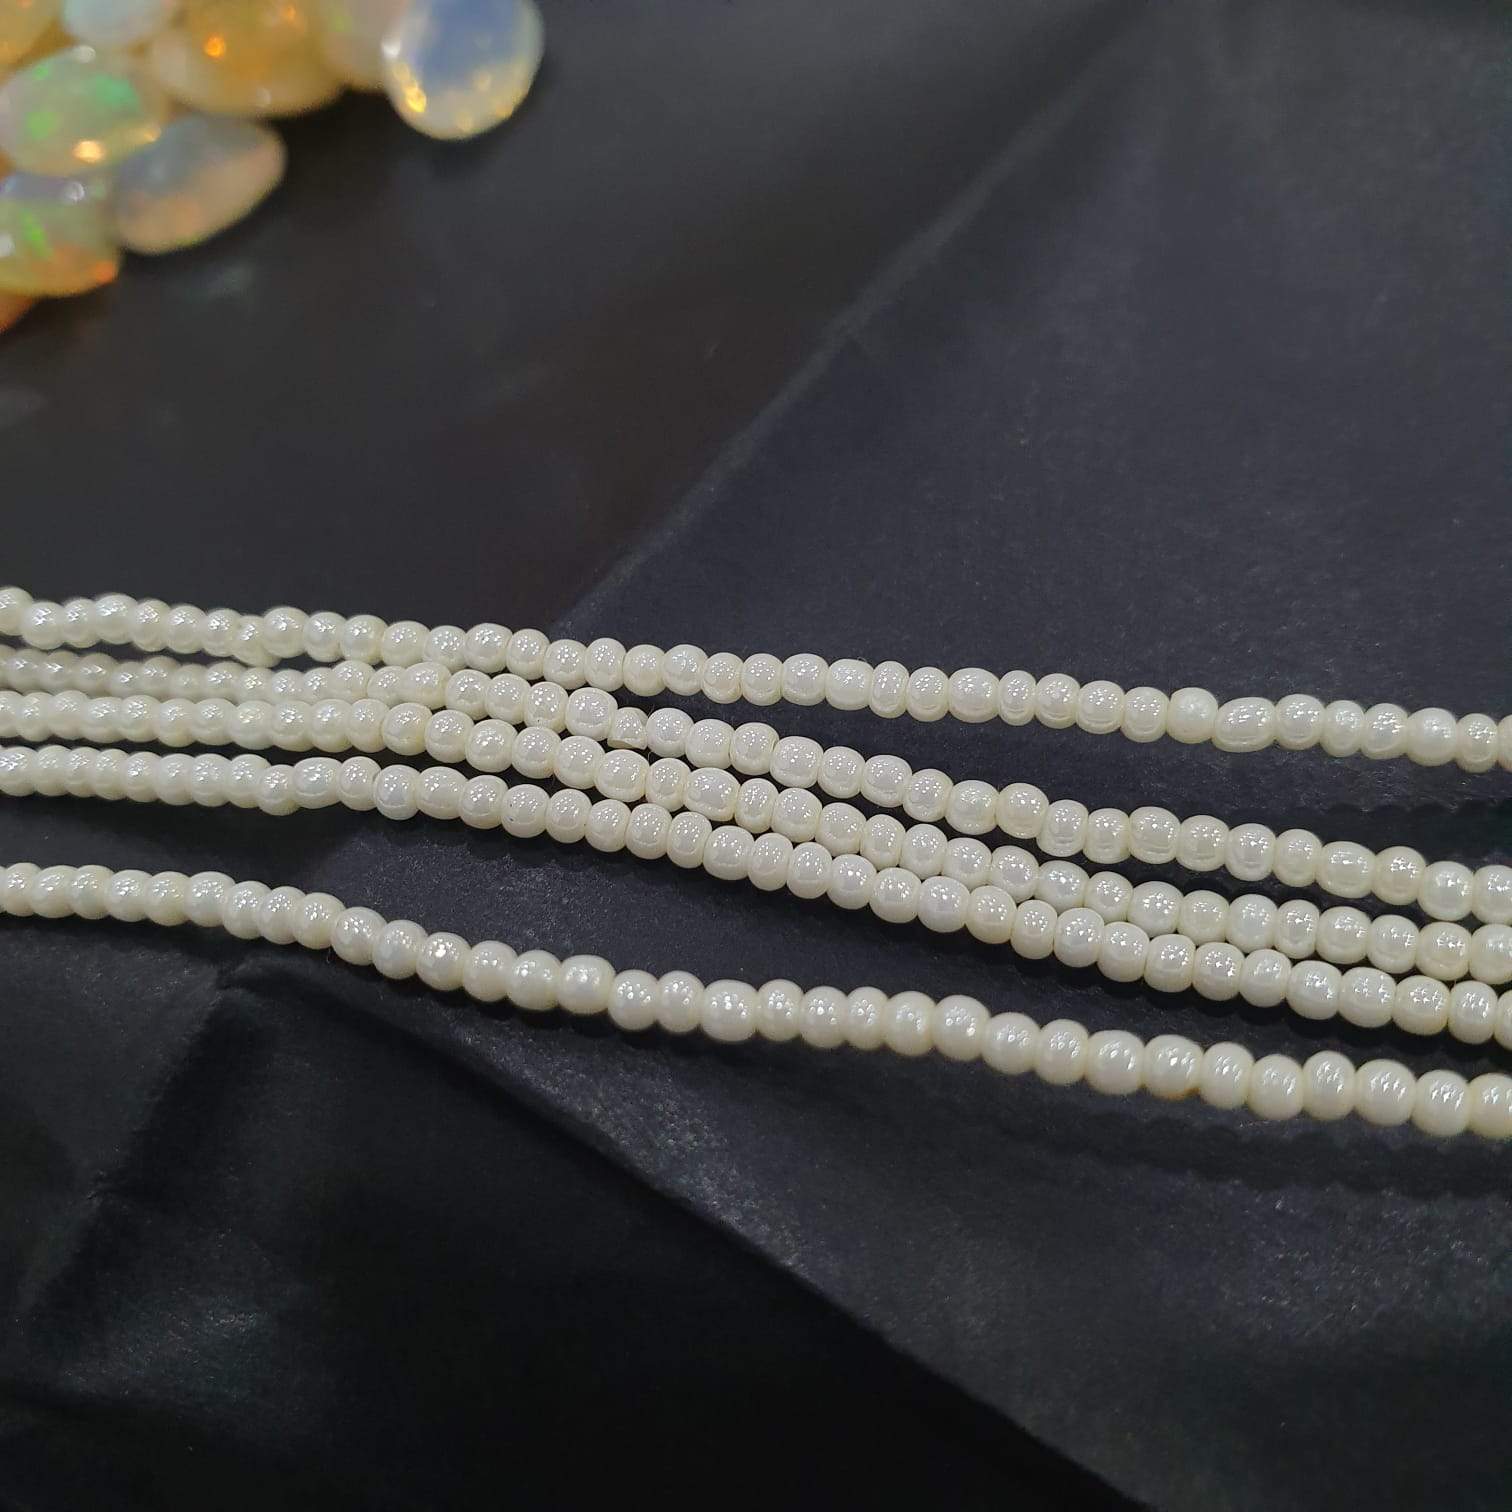 SALE🥳 Fresh Water Pearl Beads Strand 2mm Top Quality 16" Inches - The LabradoriteKing